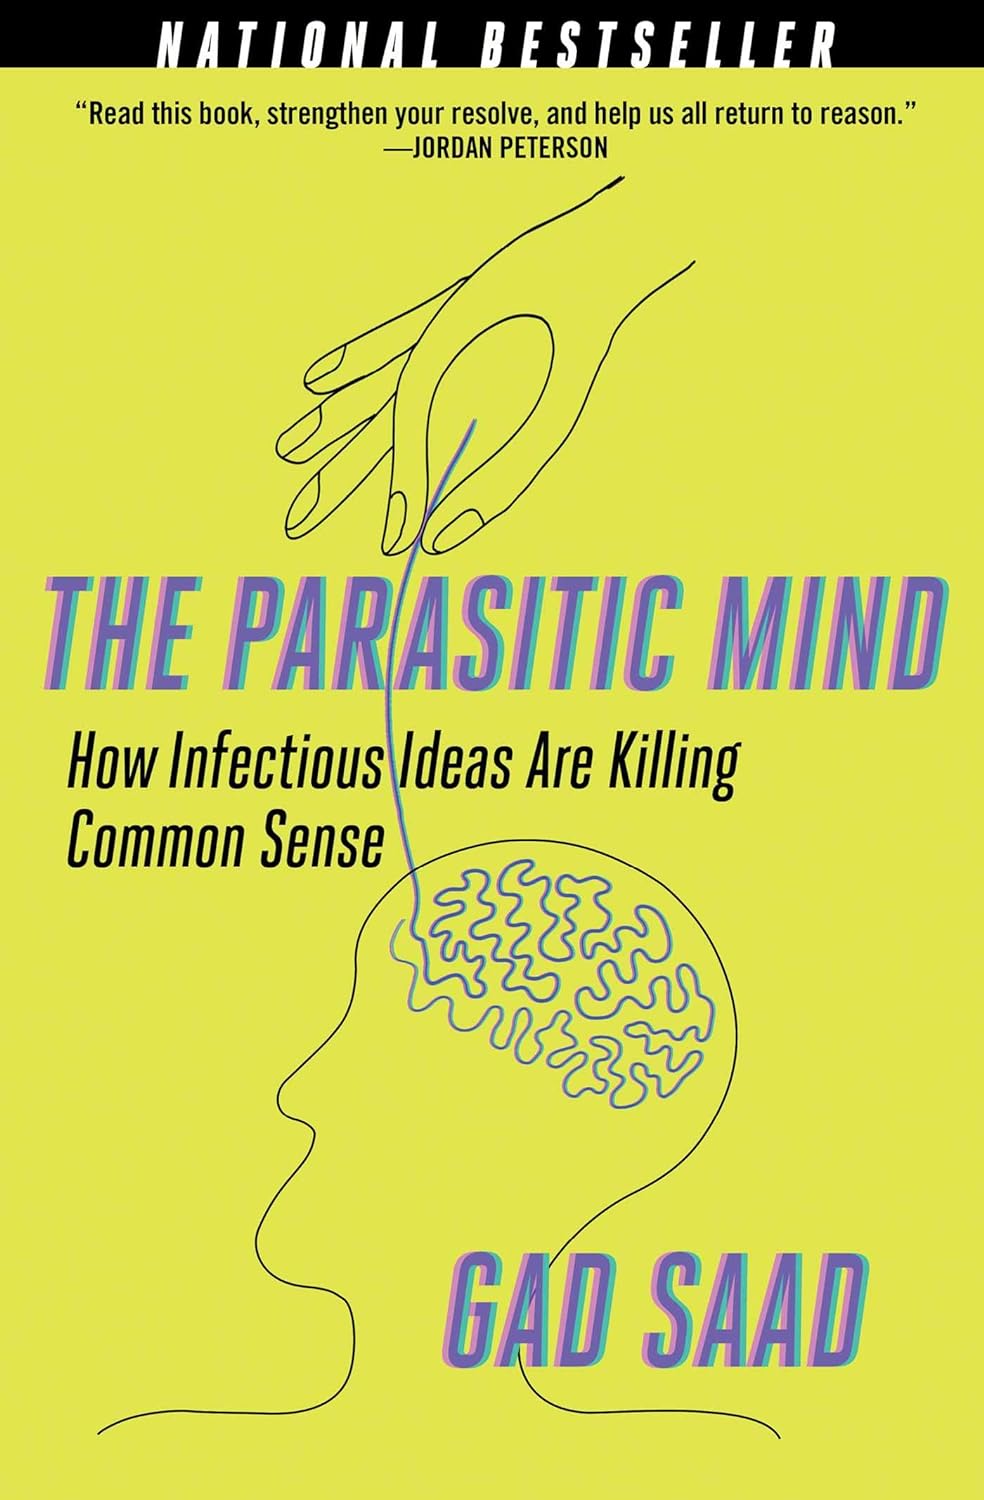 The Parasitic Mind by Gad Saad